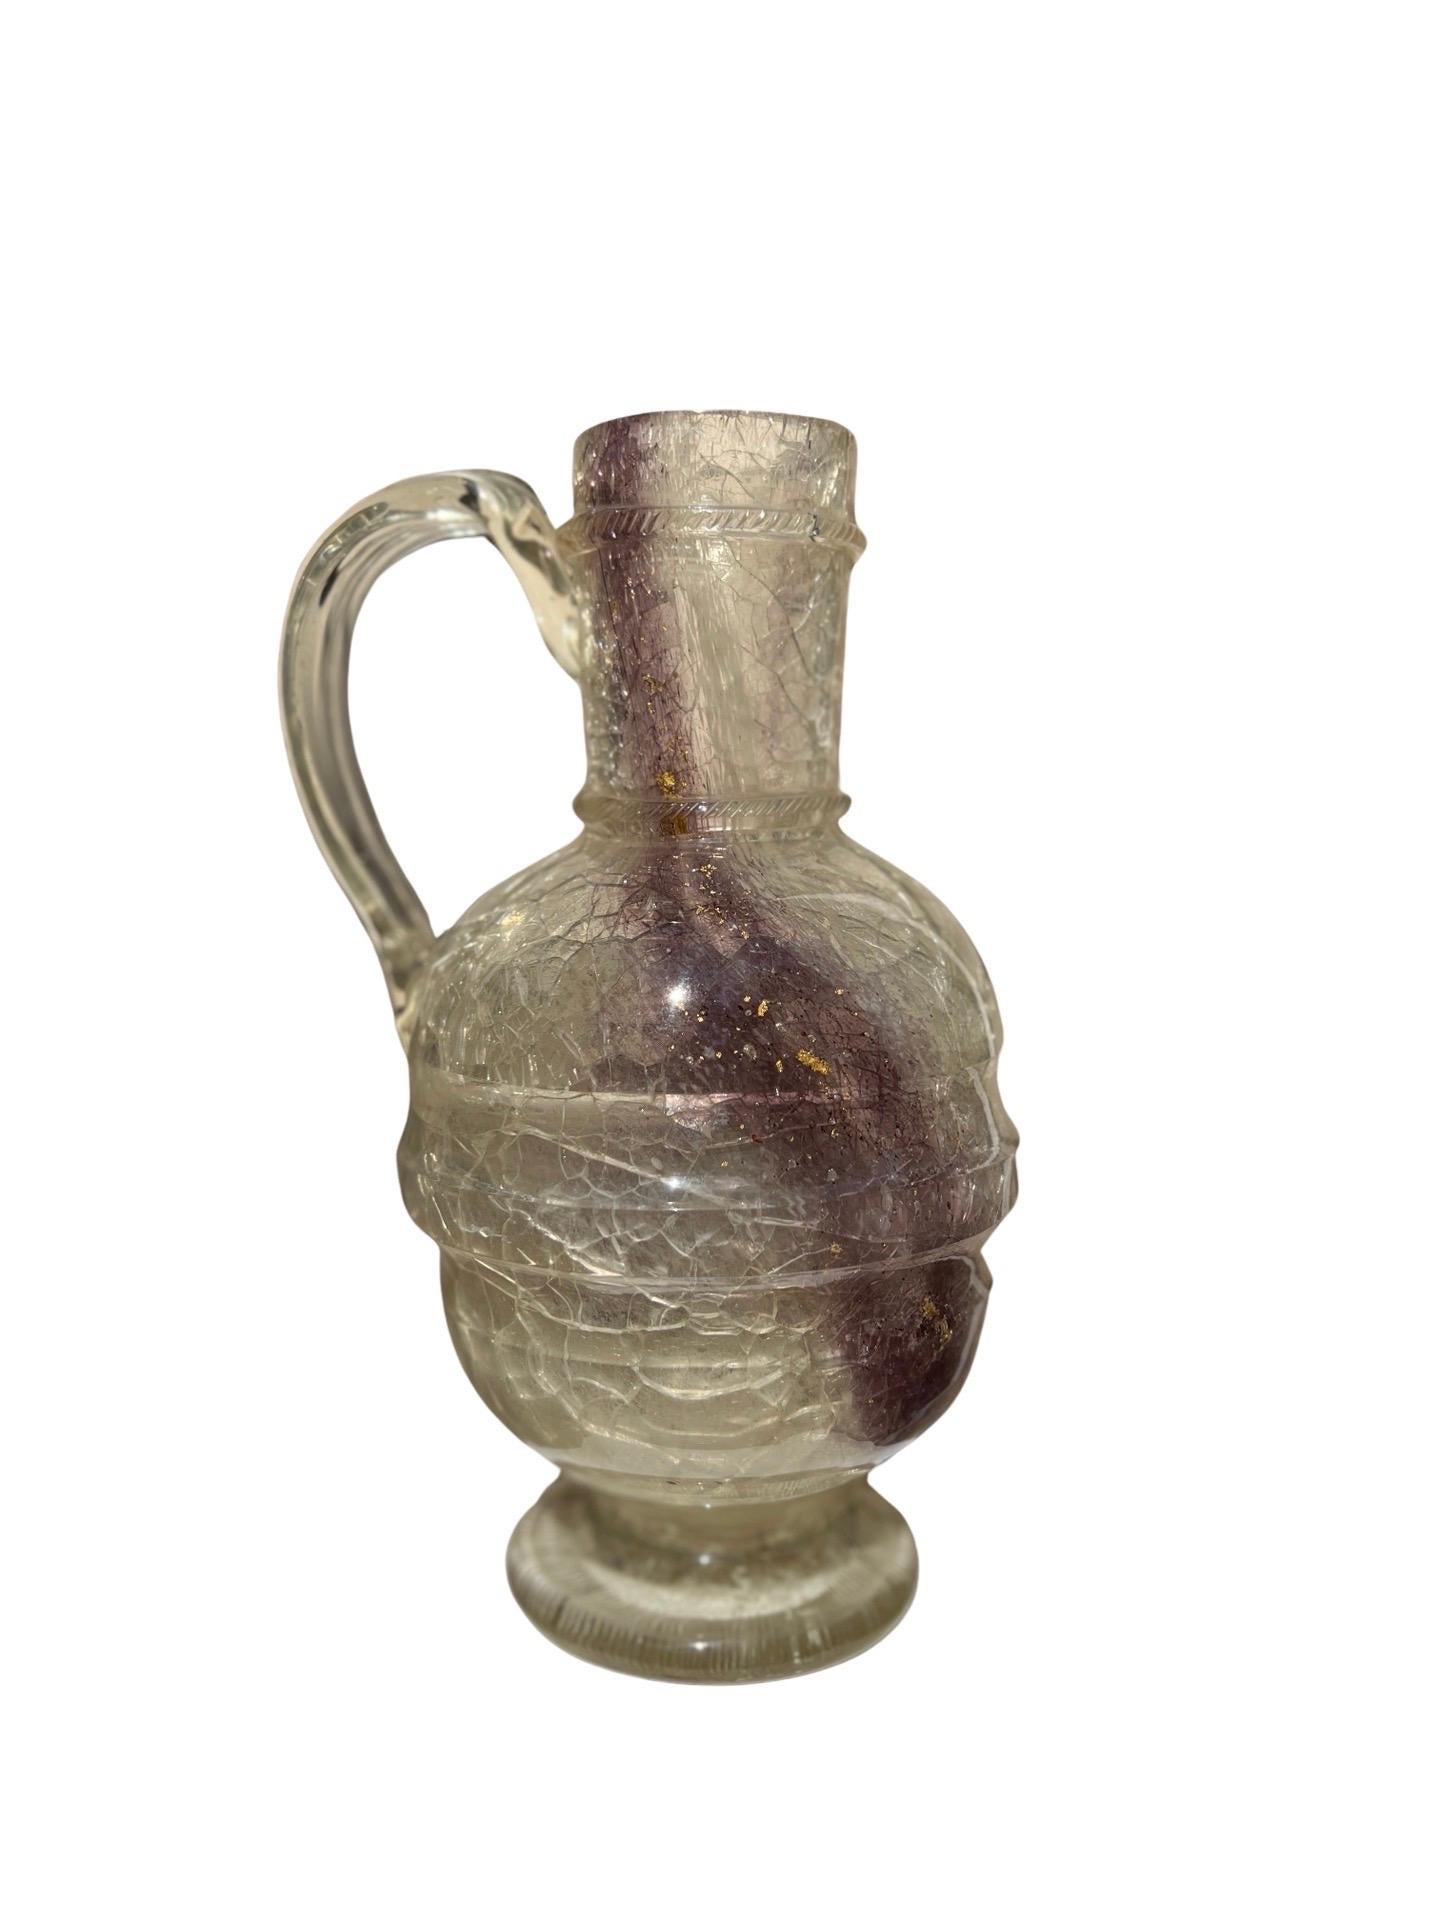 Likely European, 19th century or earlier.

This pitcher is incredibly unique and unusual. The interior has a cracked rock crystal surface, purple striations and gold flecking which appears to be encased with a glass surface and applied handle. 
A